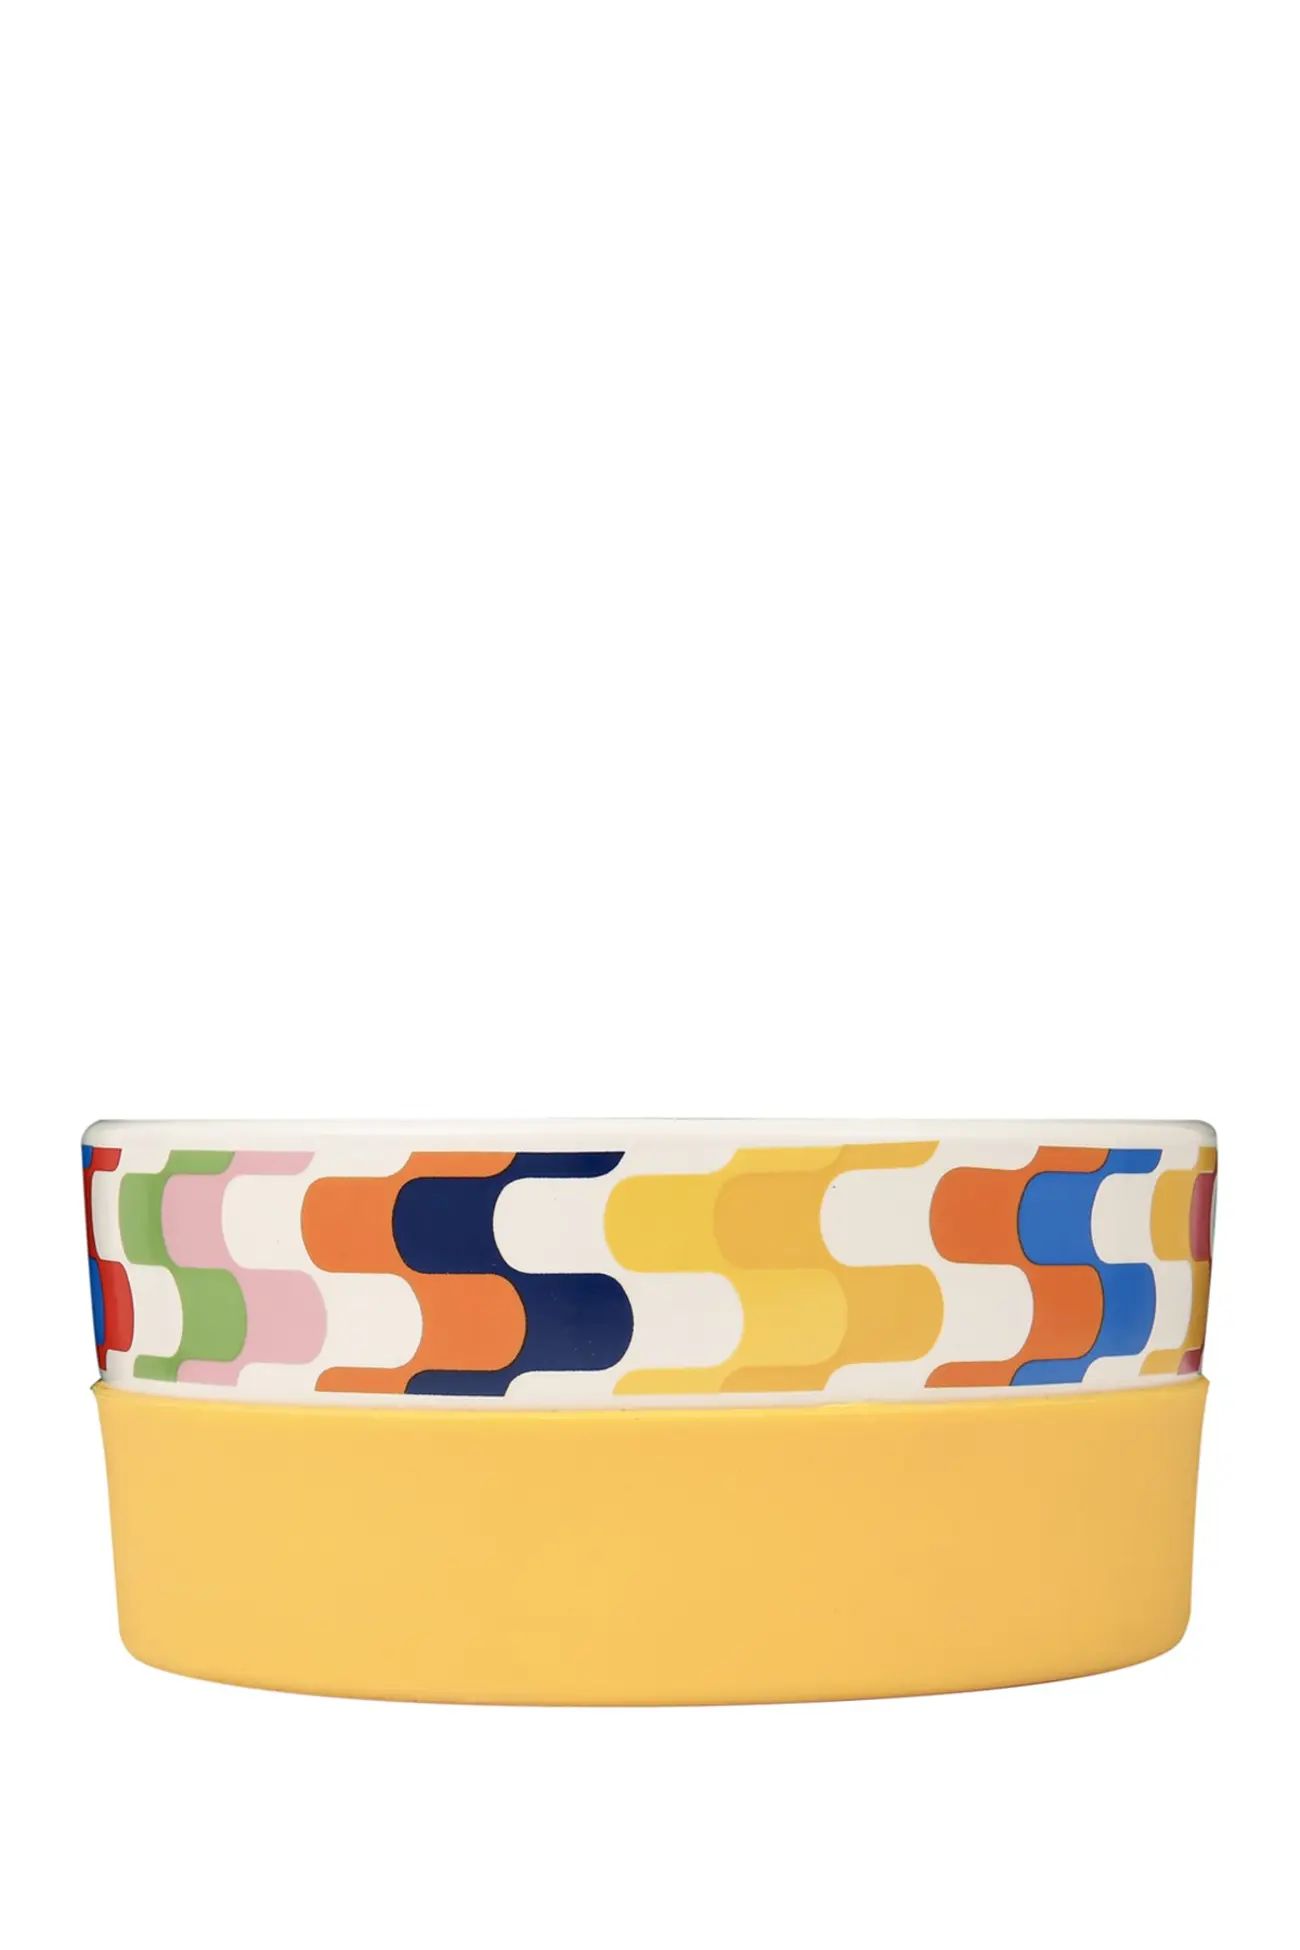 FETCH 4 PETS | Jonathan Adler: Now House "Bargello" Duo Dog Bowl - Small | Nordstrom Rack | Nordstrom Rack